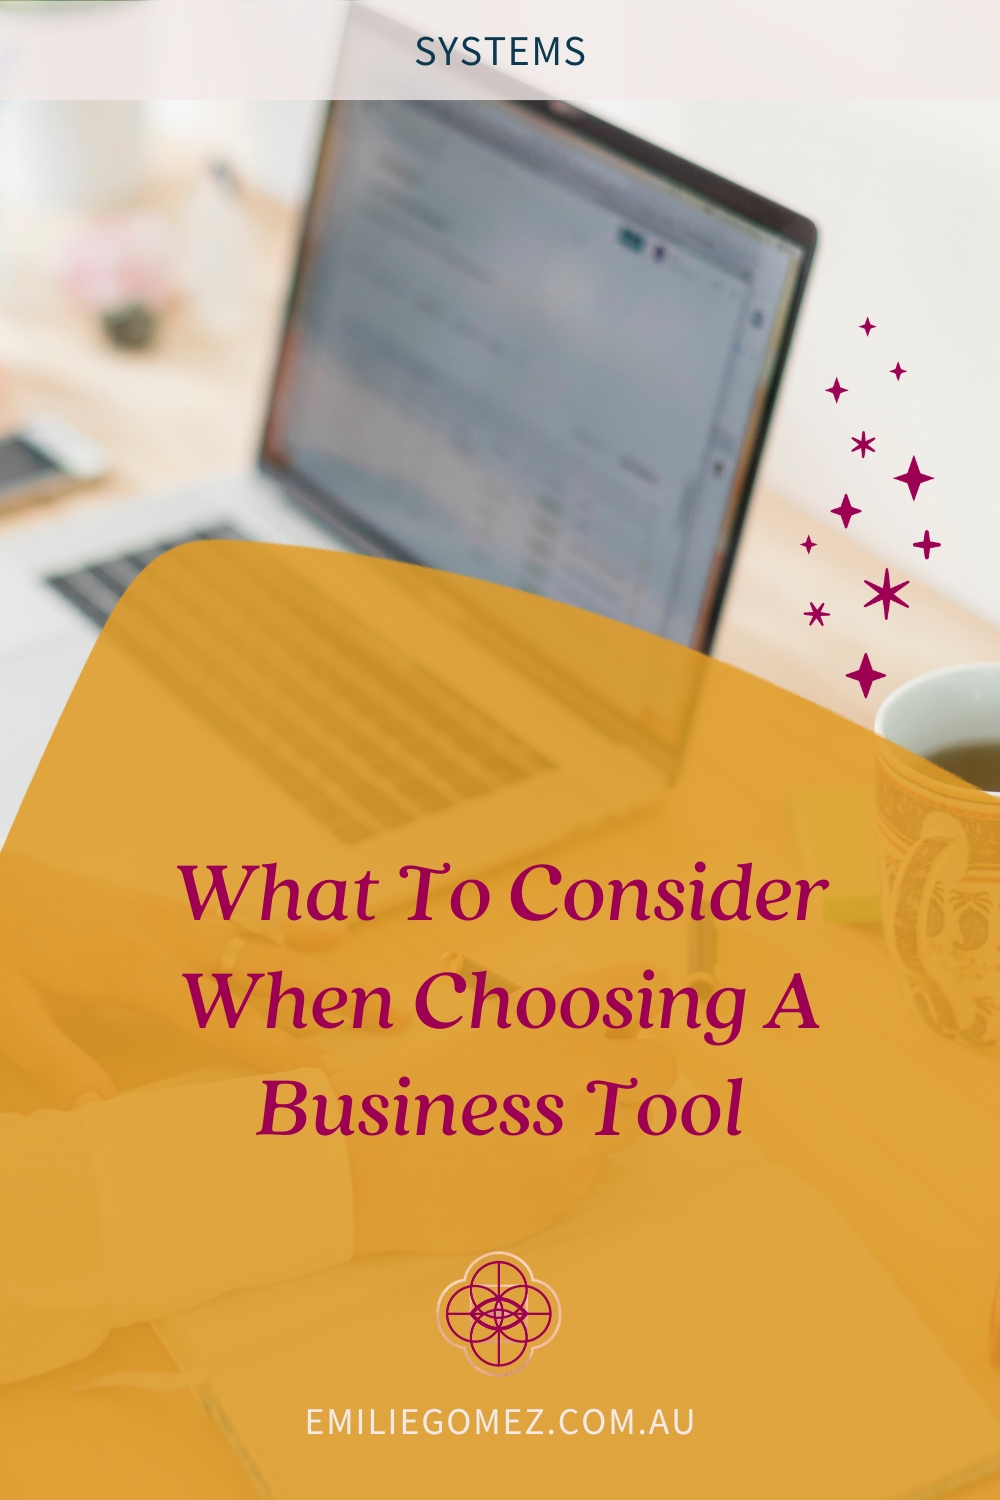 With so many business tools on offer nowadays, it can be incredibly overwhelming to try and choose the best tool for your specific business. This blog post walks you through what to consider when choosing a business tool so that you can make choosing the right tool easier. Click through to get started!